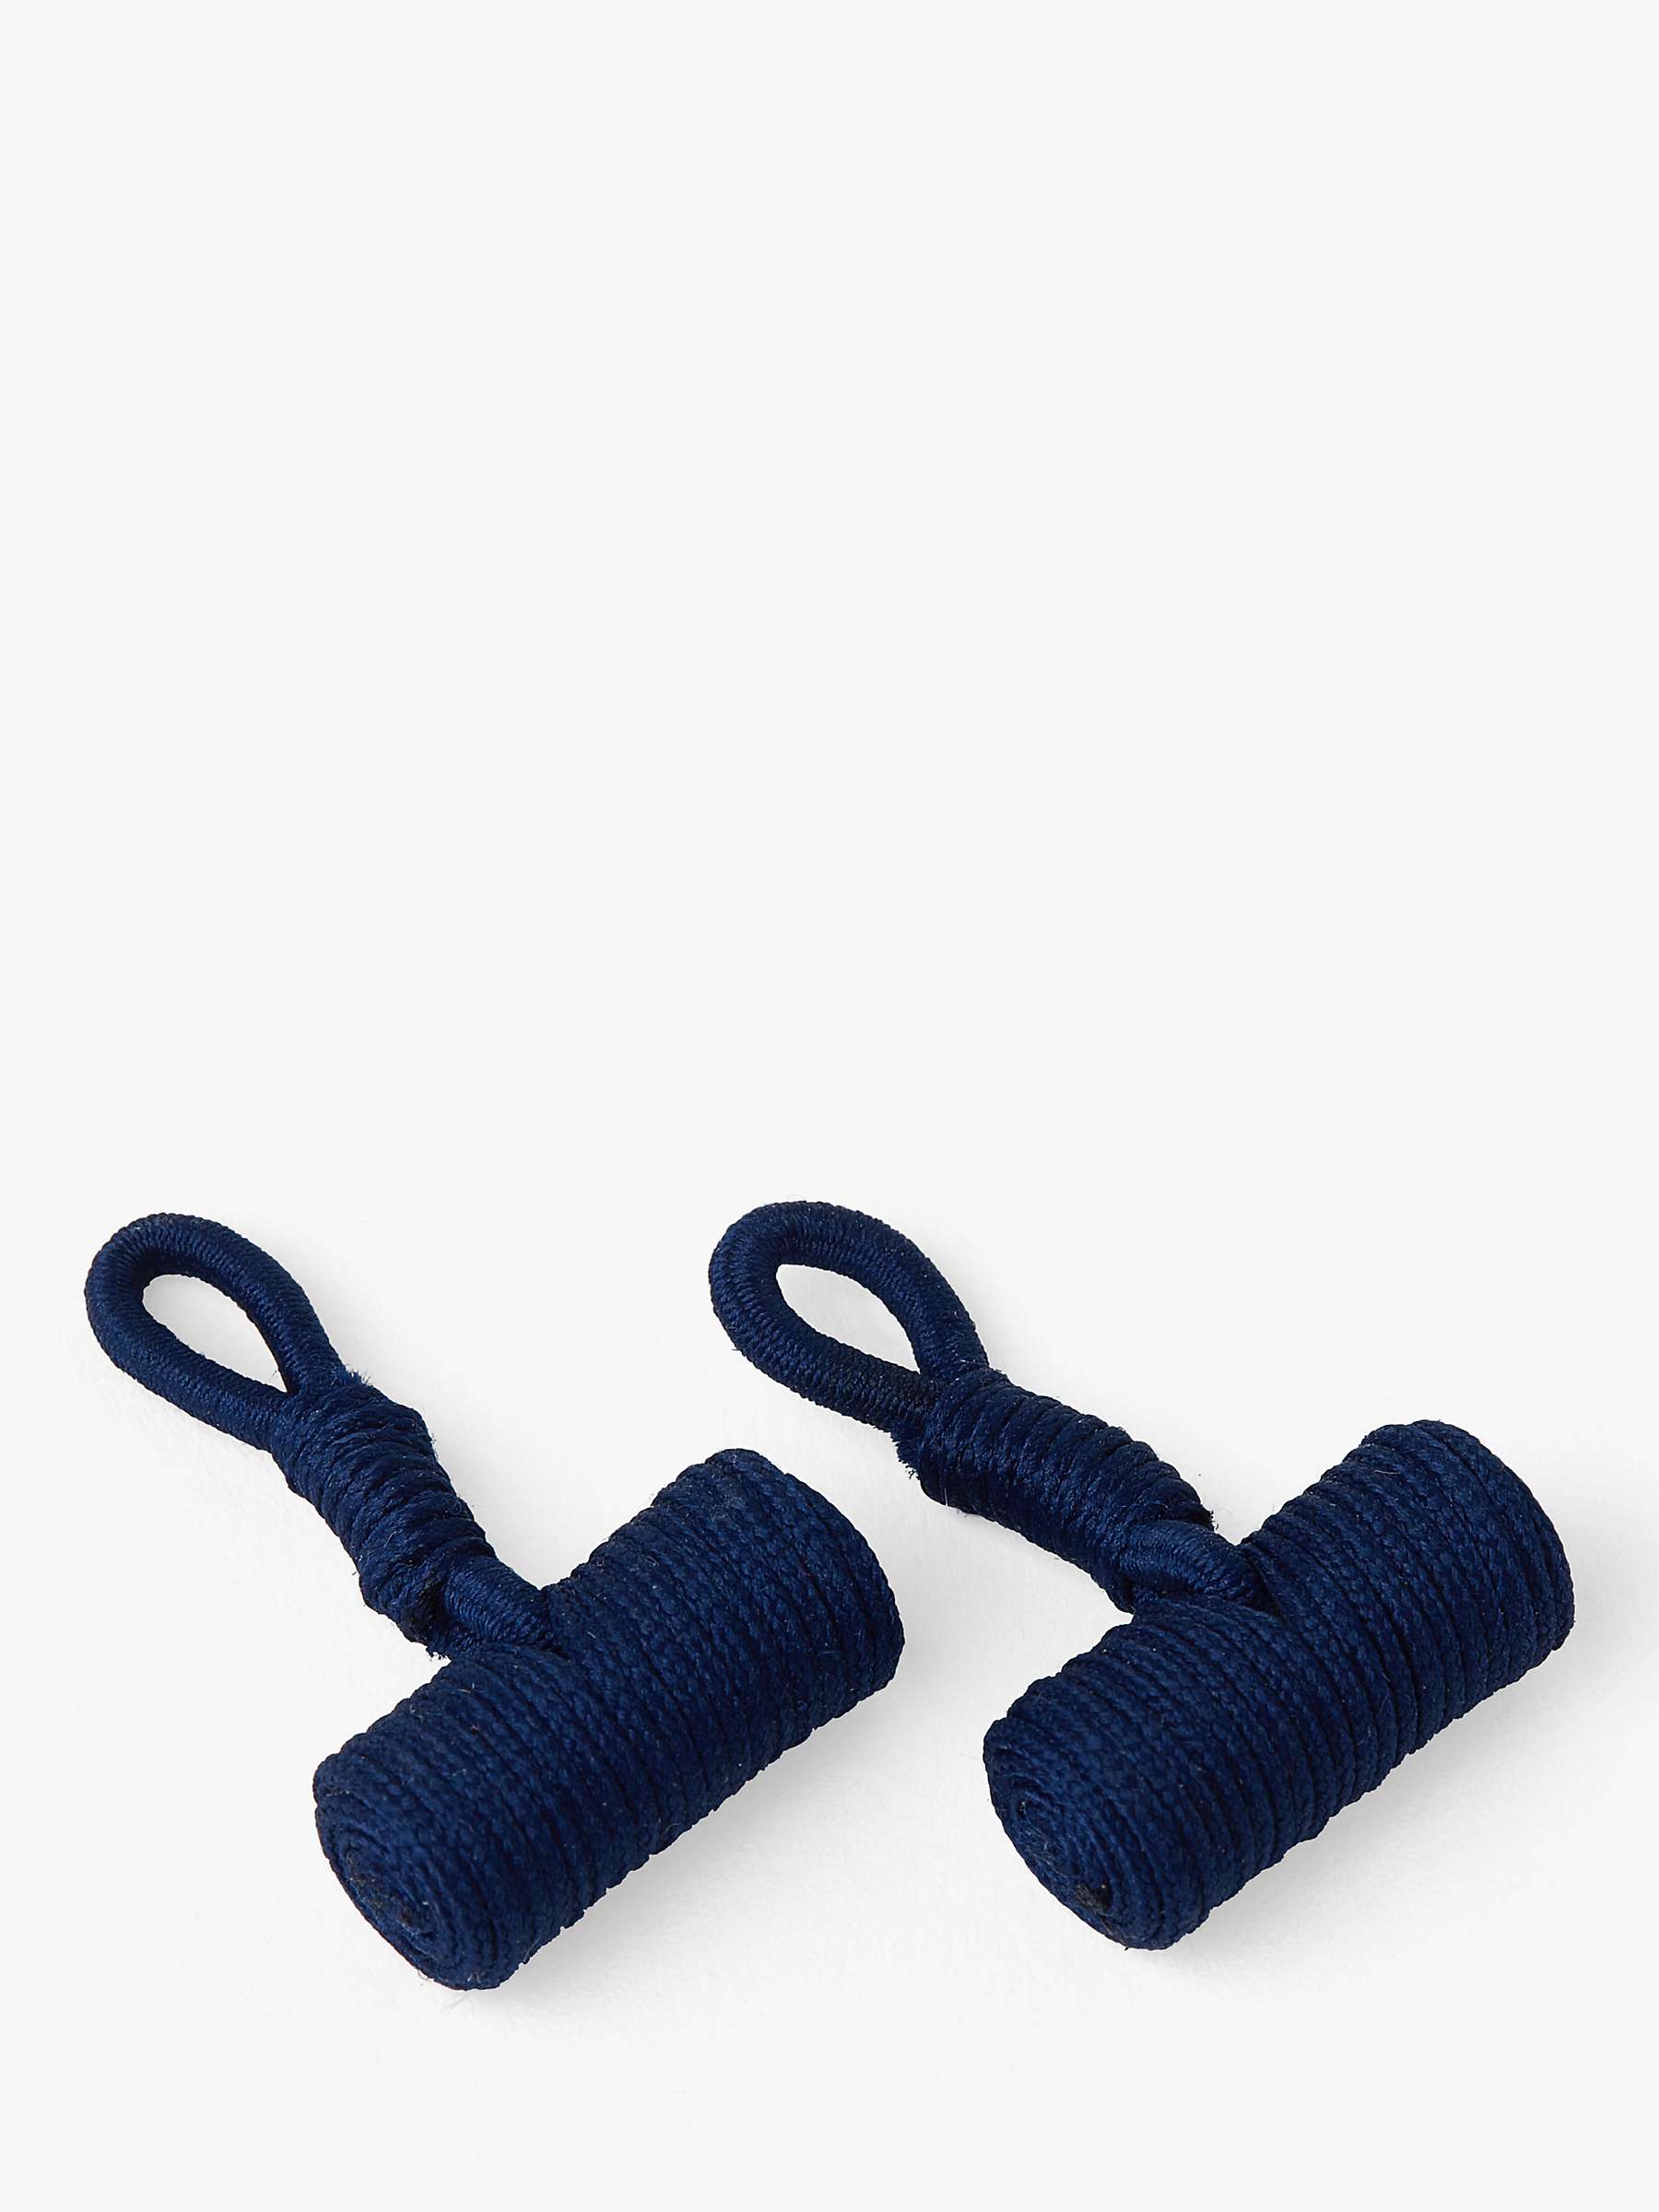 Buy KOY Casual Stretchy Cufflinks, Navy Online at johnlewis.com